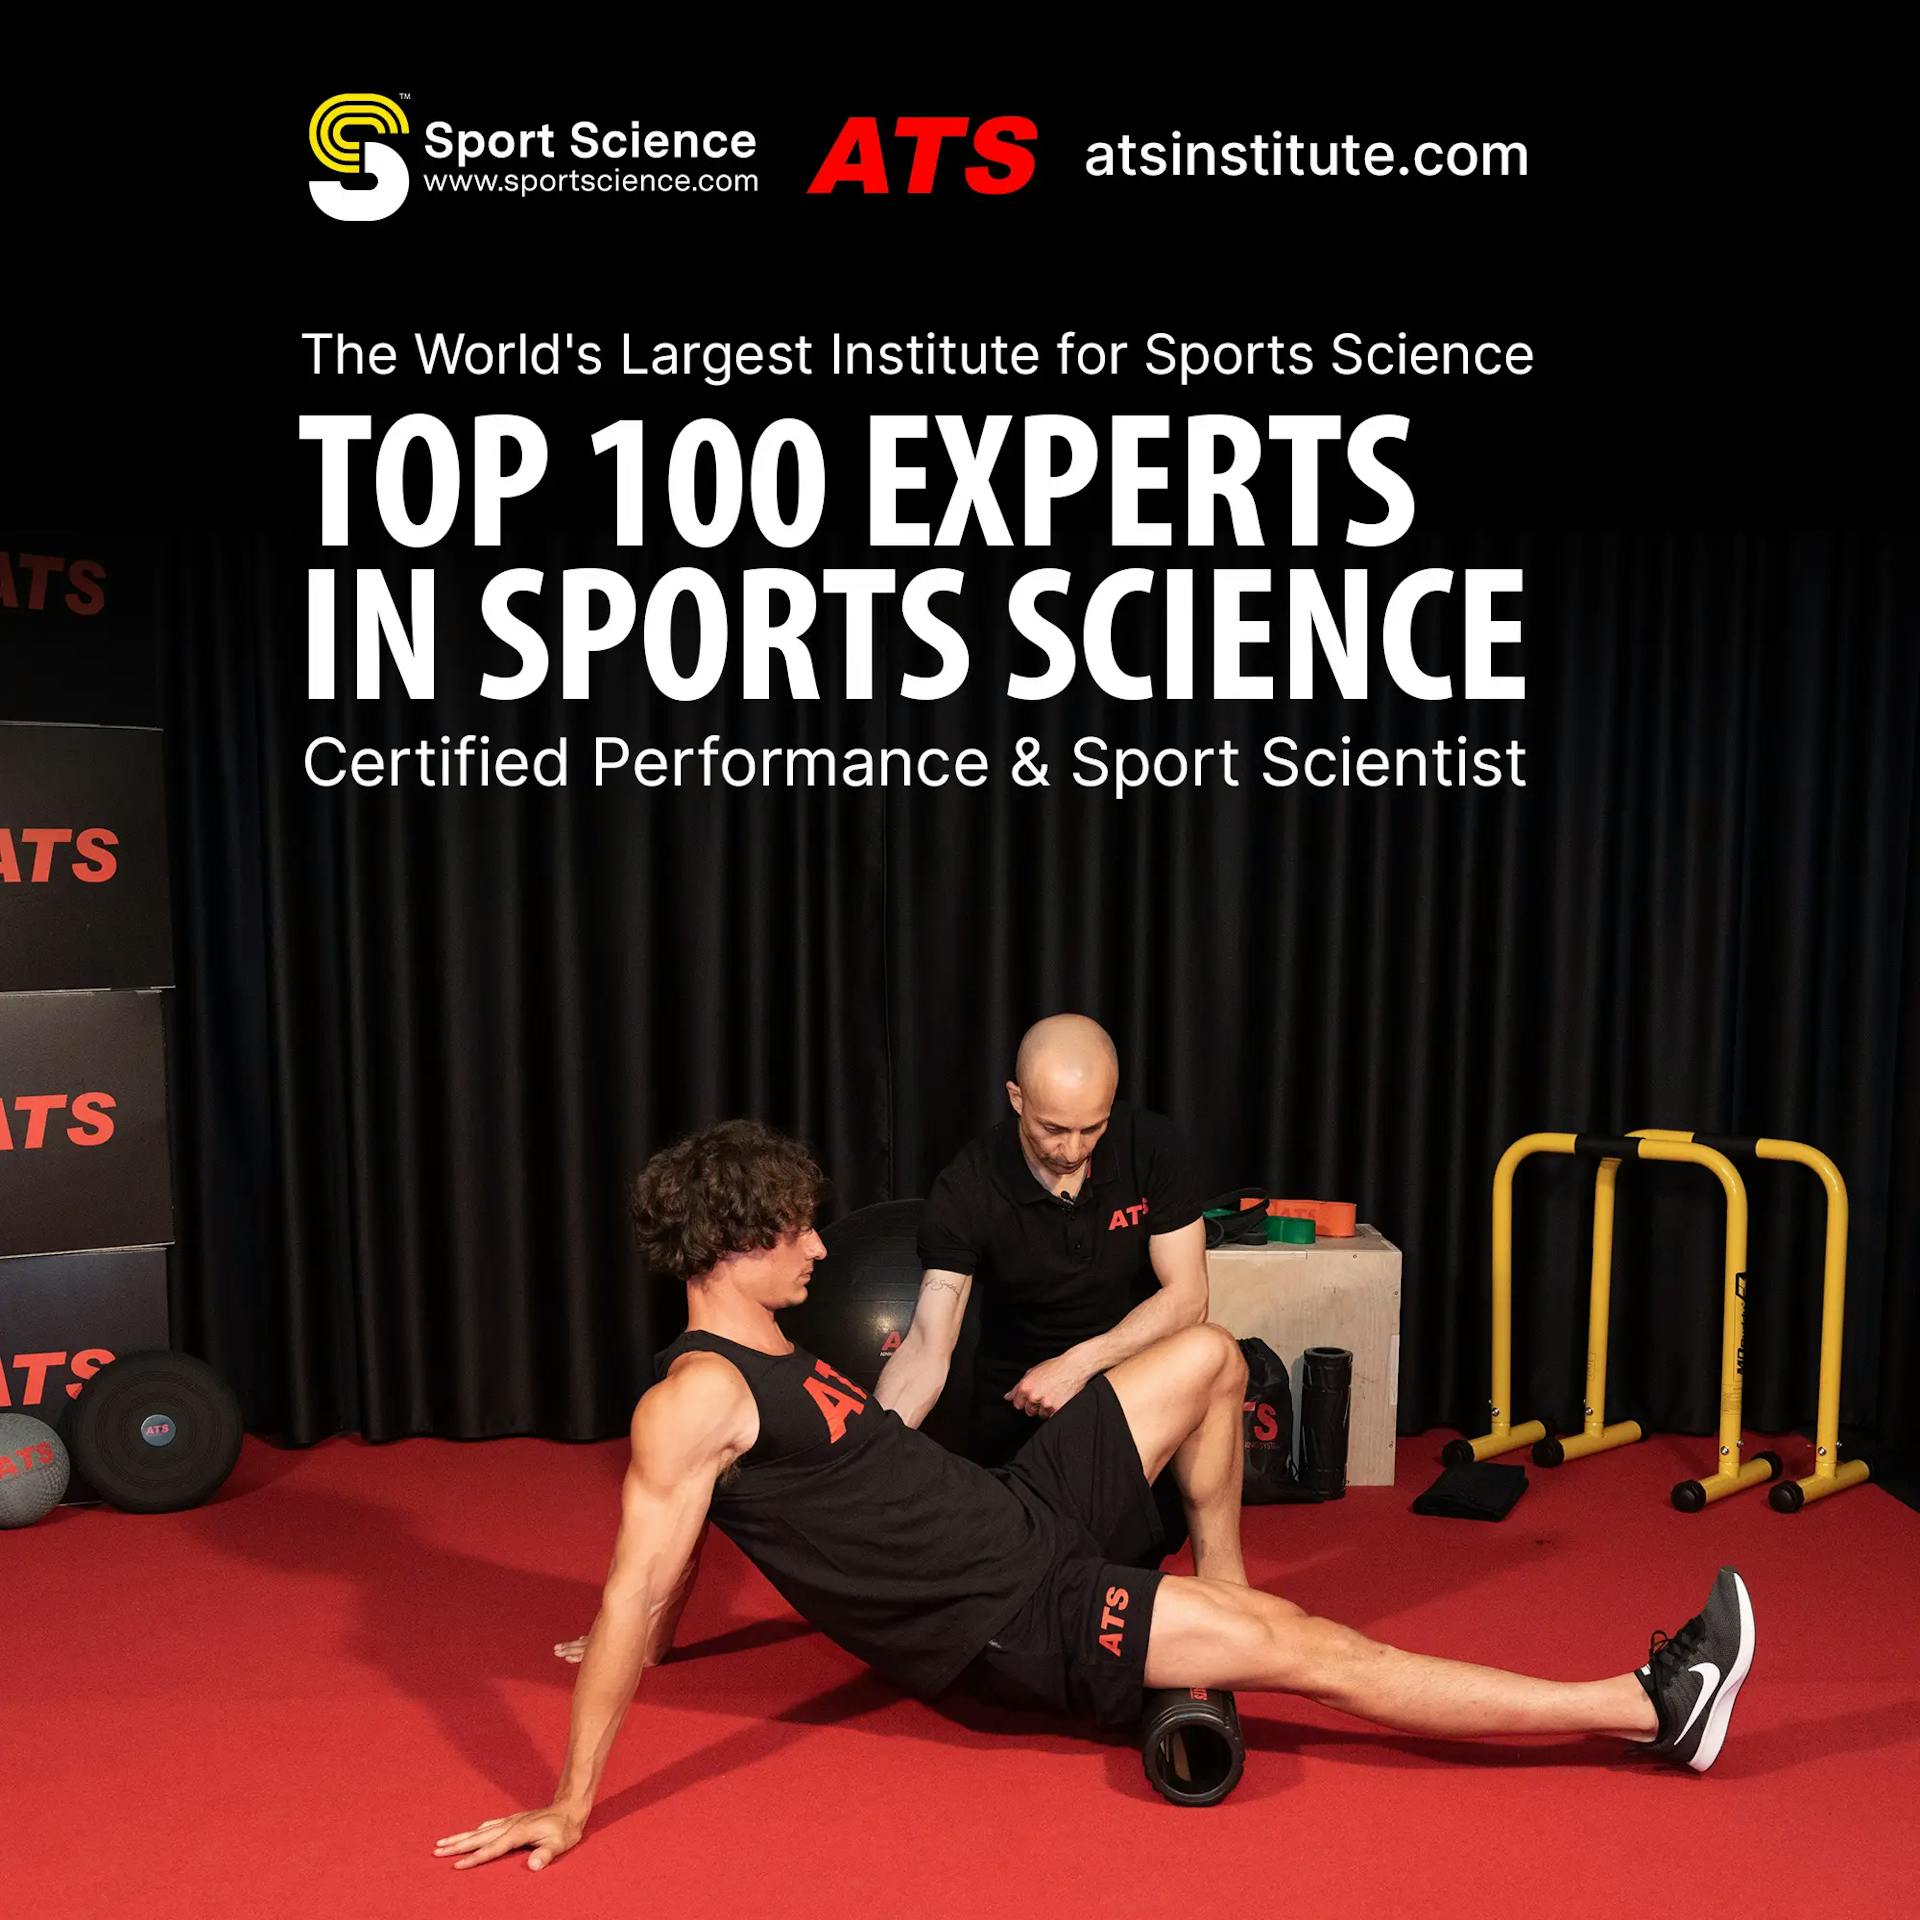 Top 100 experts in Sport Science